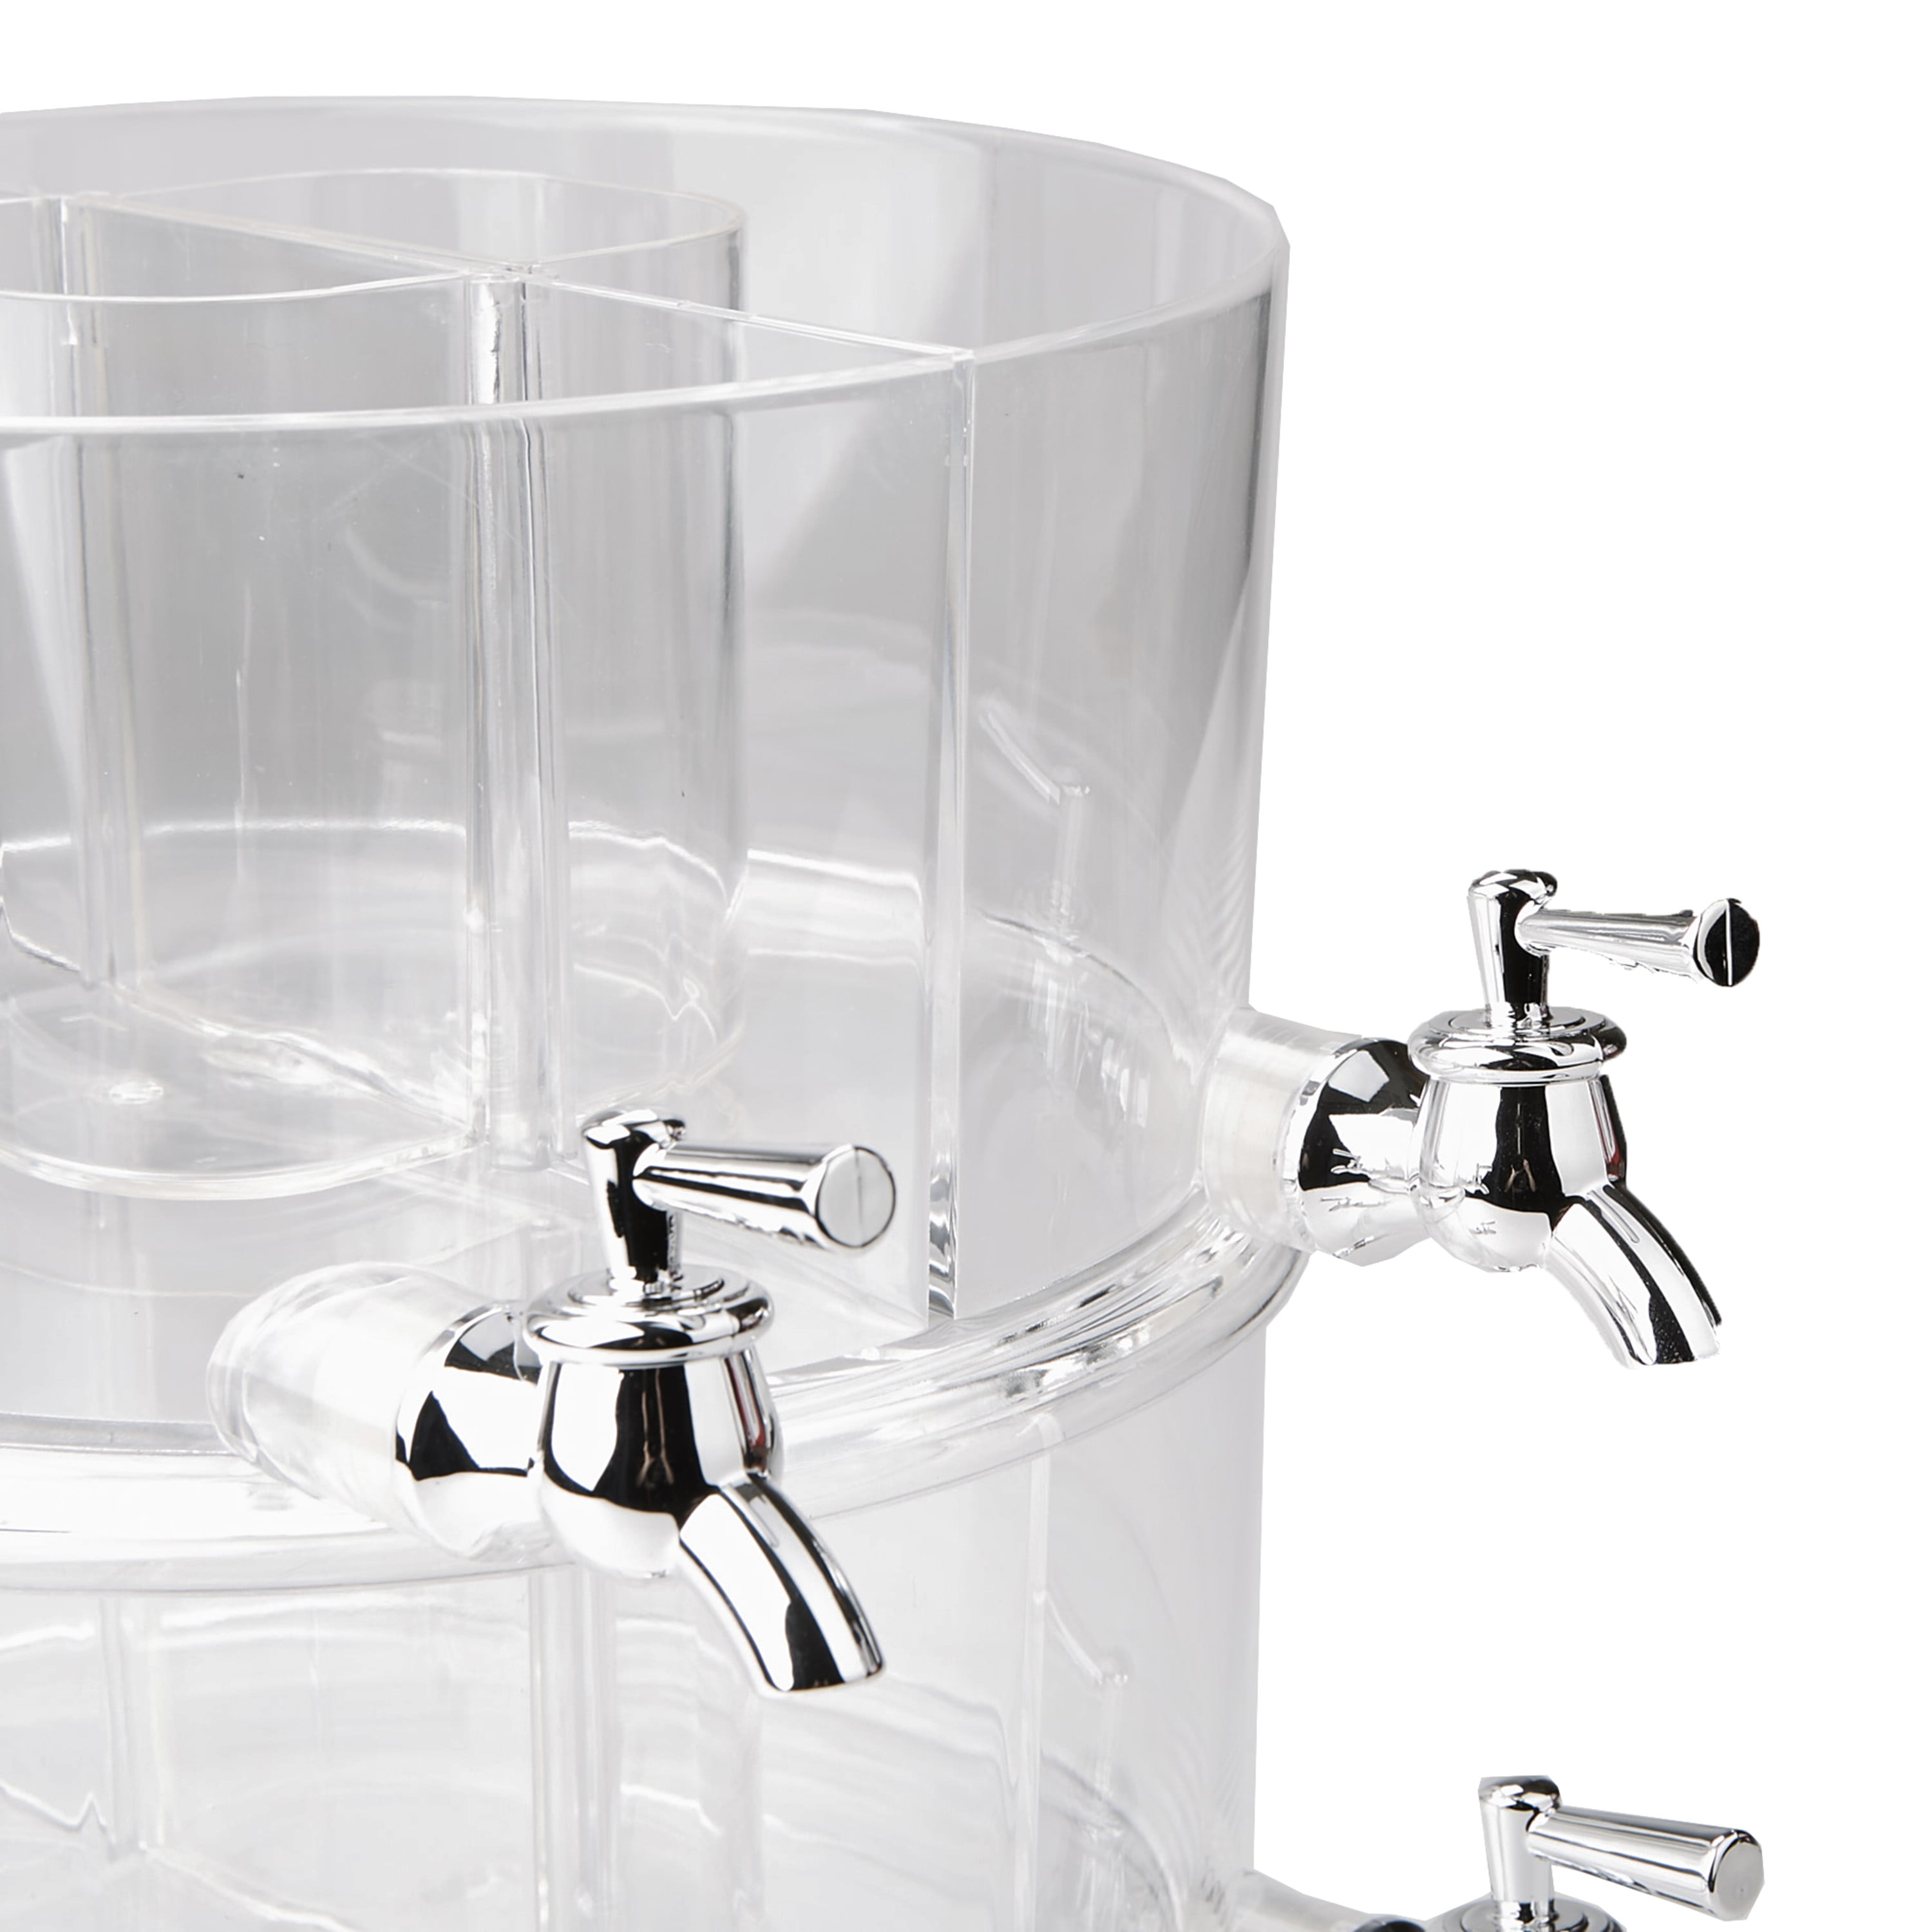 Mind Reader 2 Tier Beverage Drink Dispenser with Spigot Stackable Punch Bowl  with Lids and Ice Bucket Bottom, Clear 